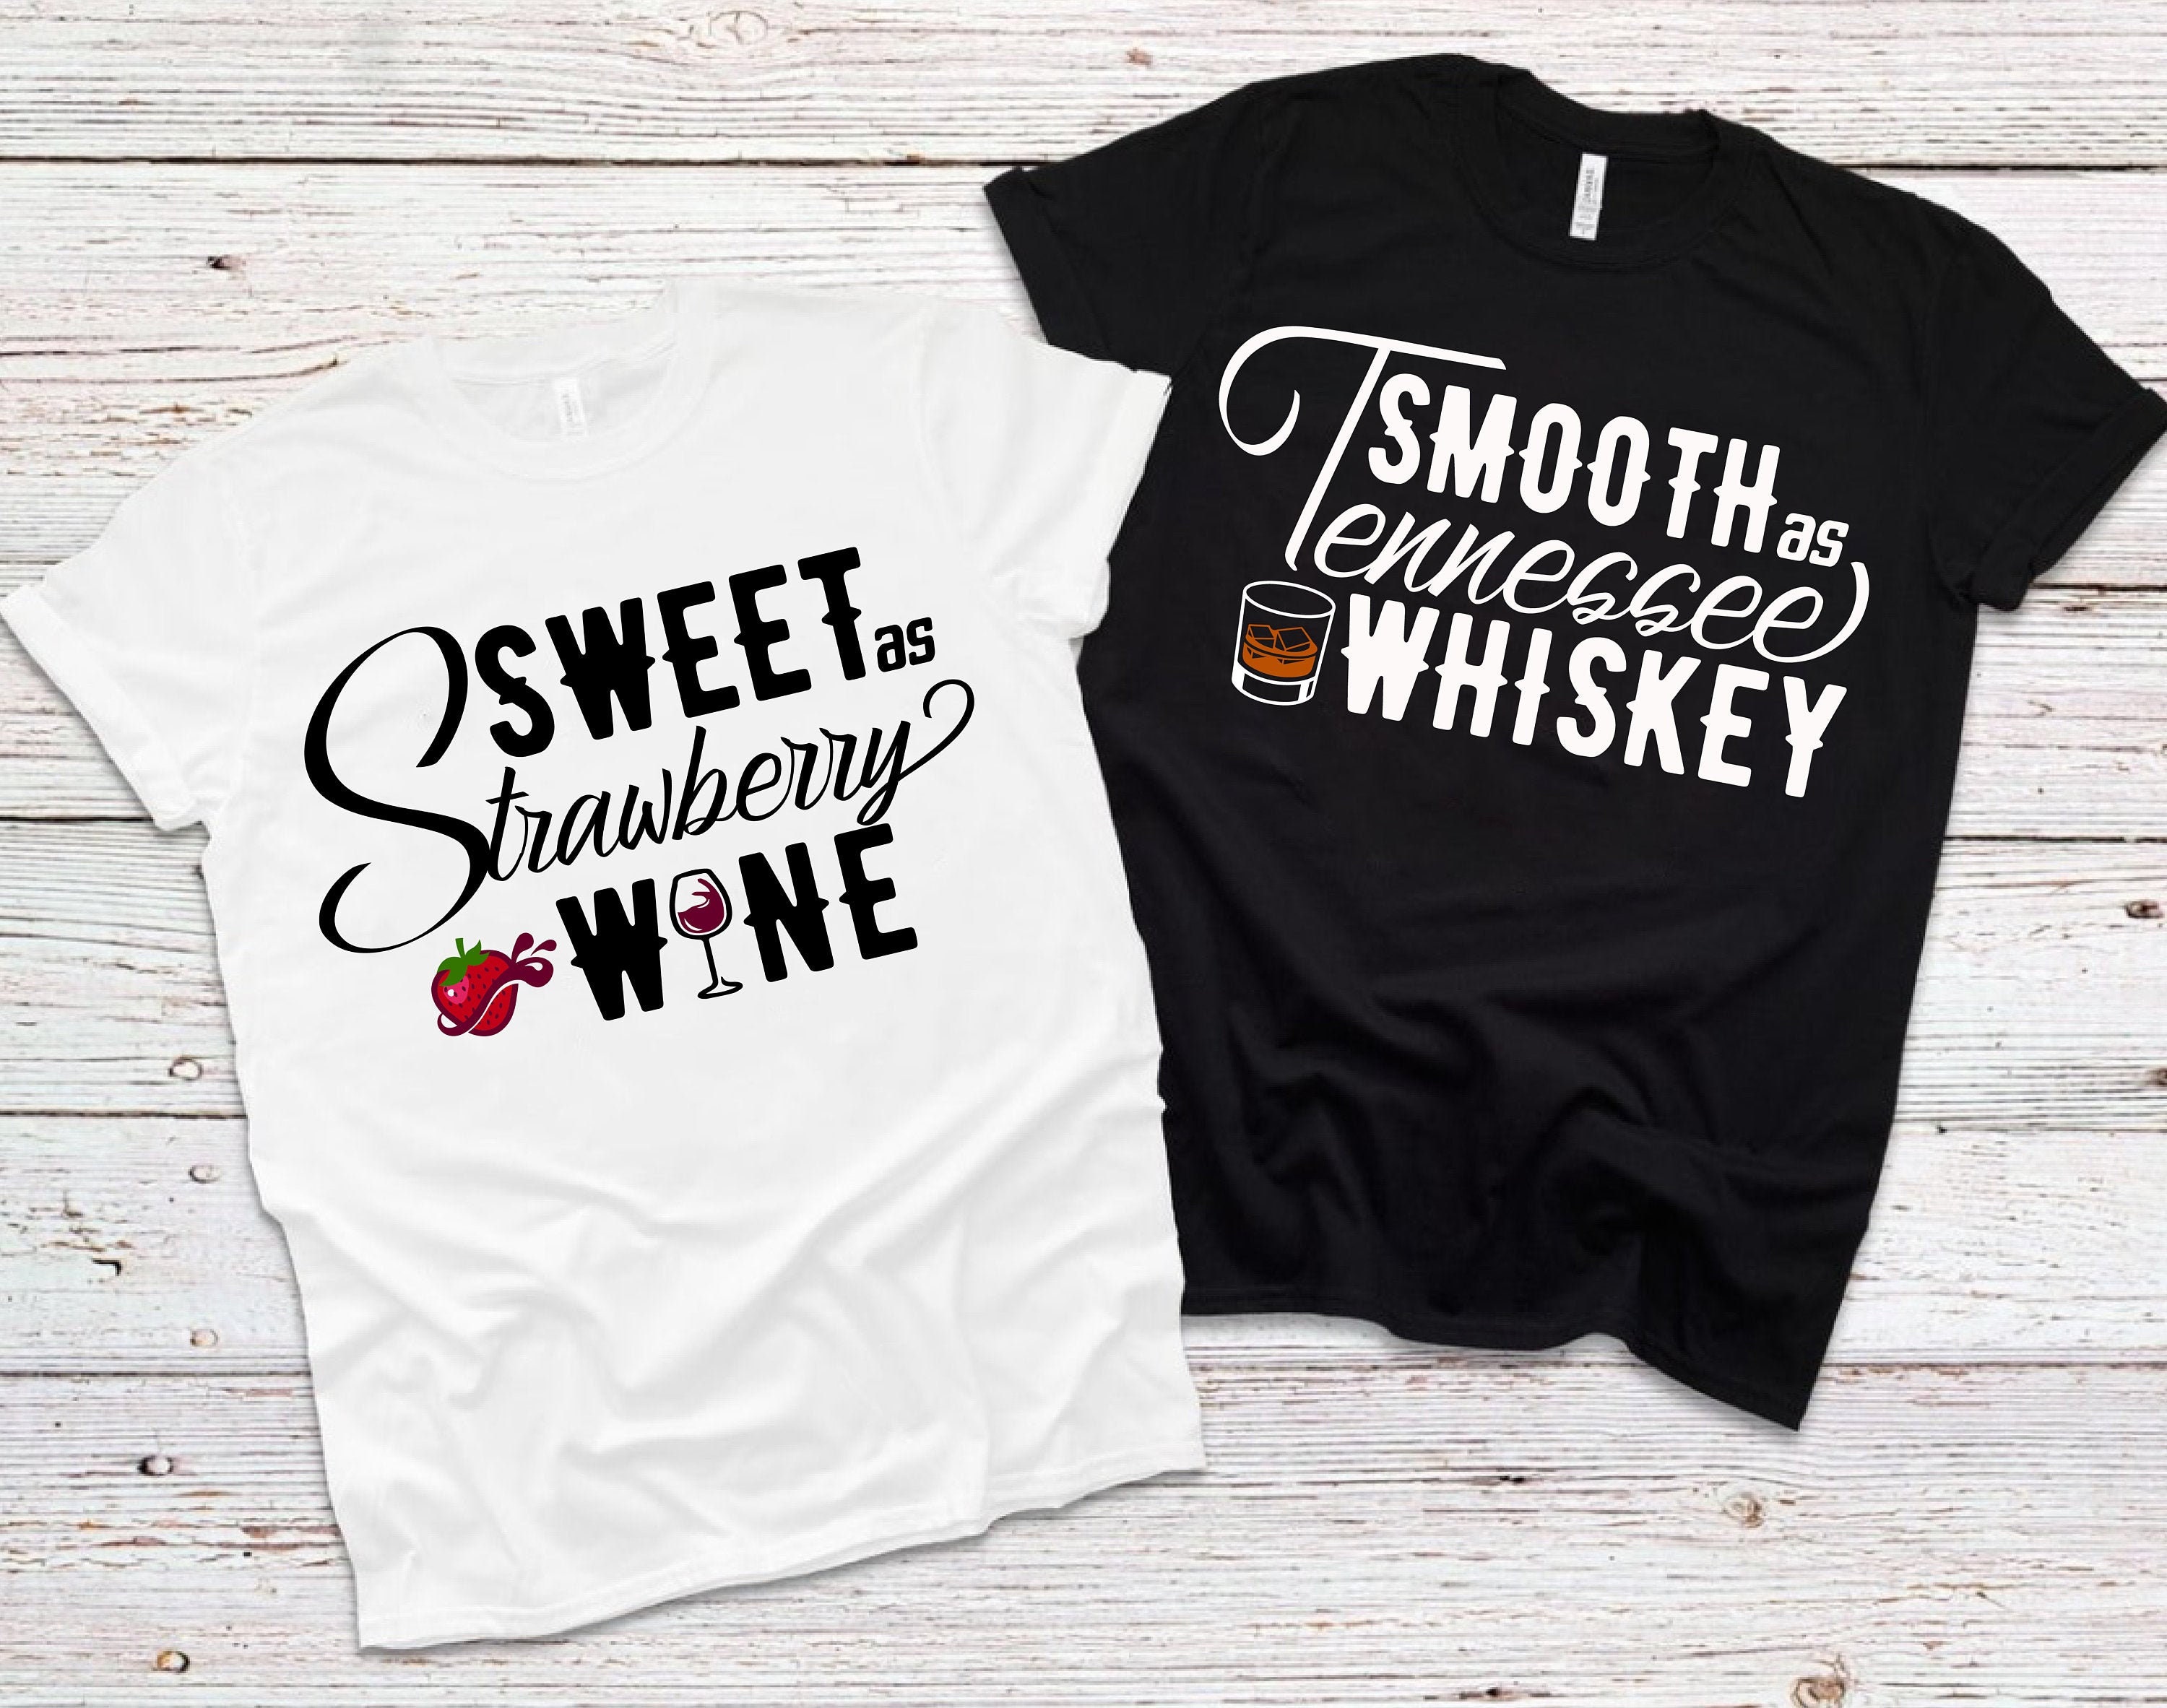 Download Smooth As Tennessee Whiskey Svg Sweet As Strawberry Wine Etsy